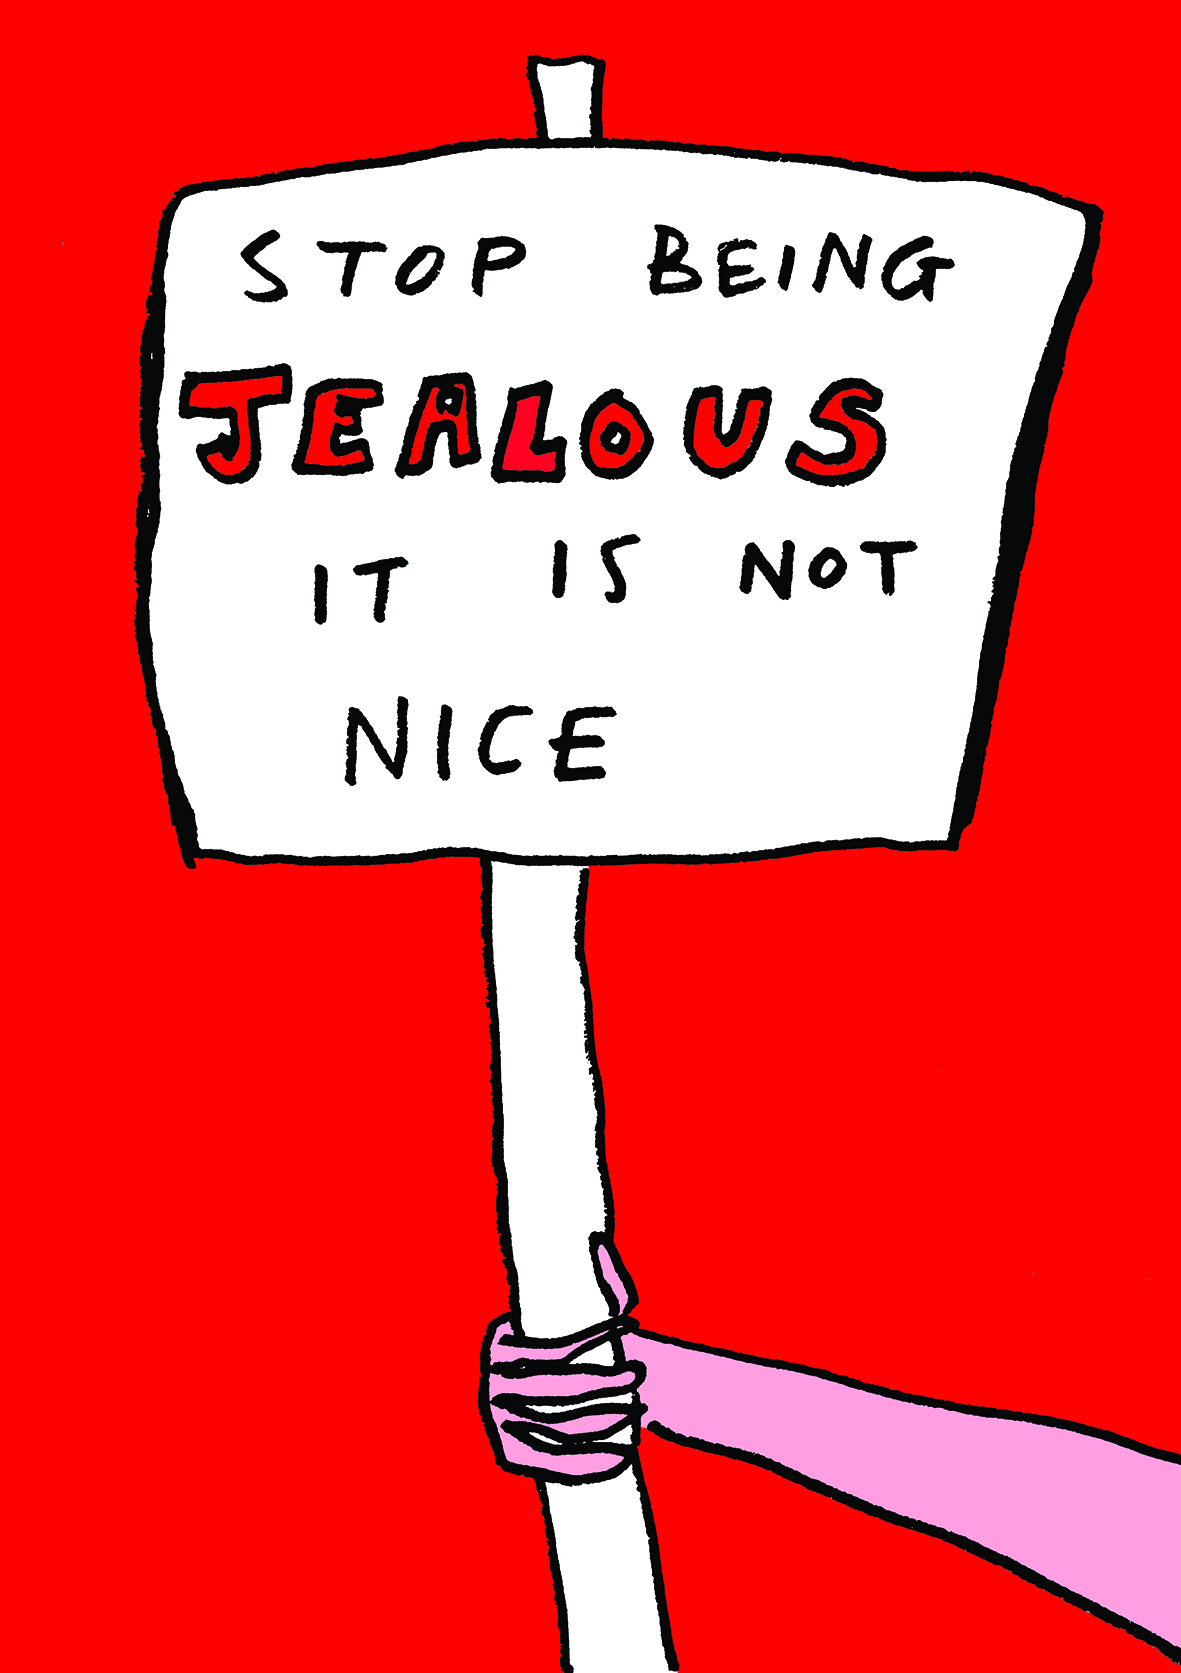 BA Illustration work by Jessica Gledhill of a pink hand holding a sign saying "stop being jealous, it is not nice" on a red background